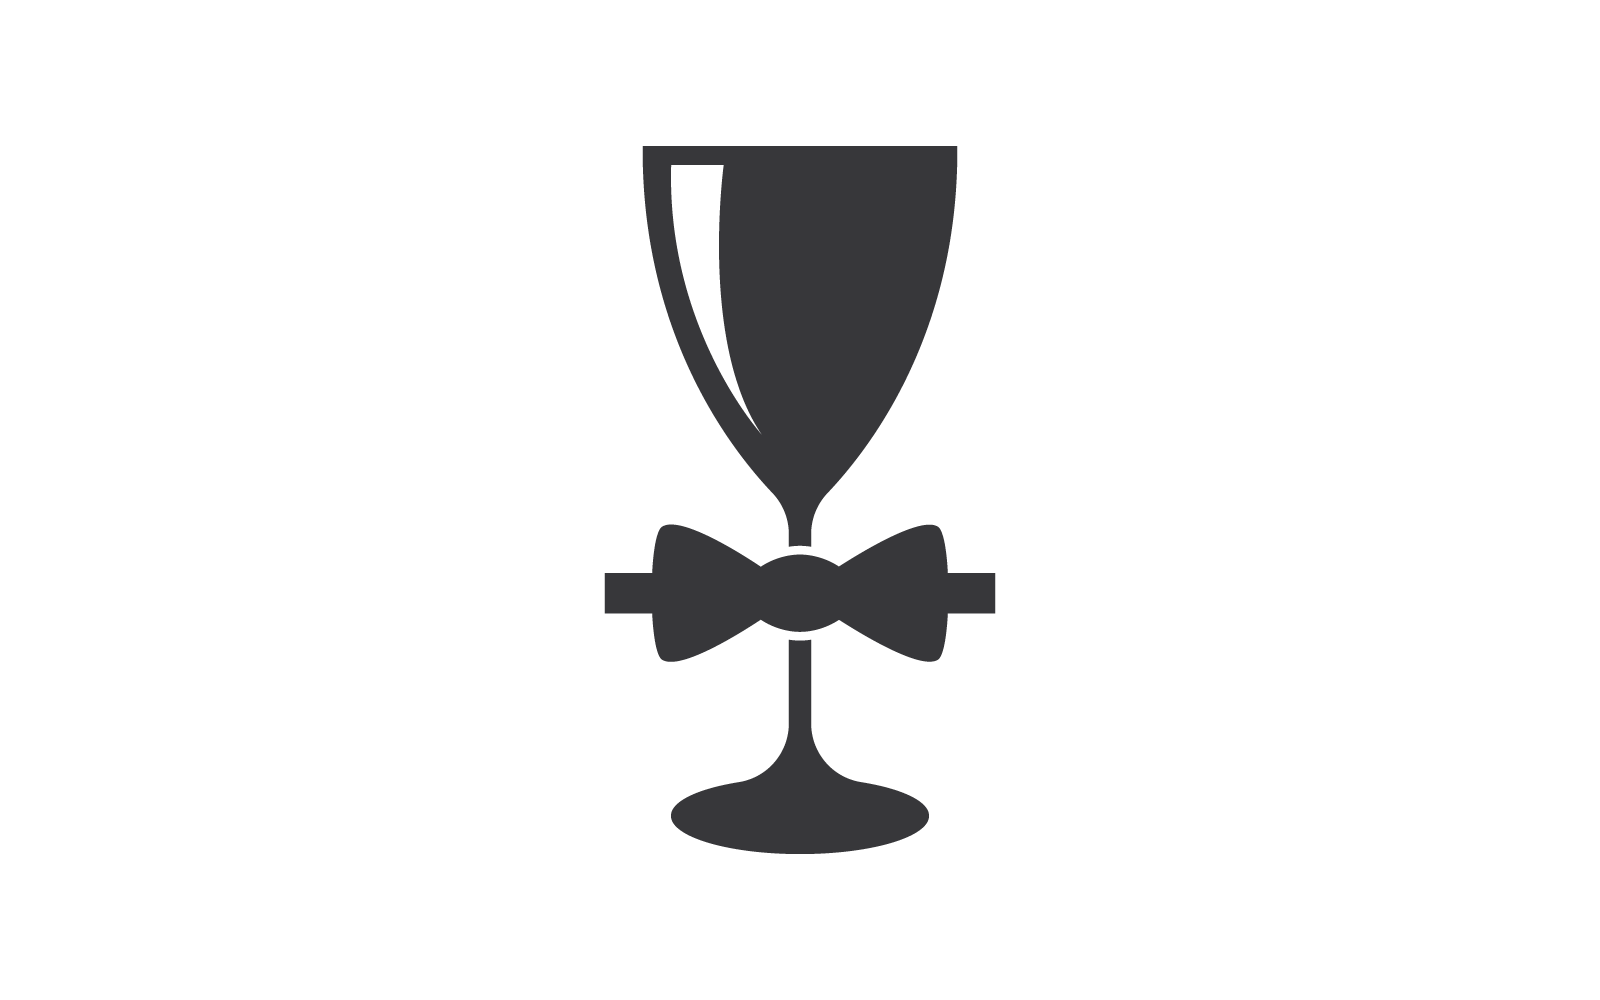 Tie and glass logo illustration vector Logo Template